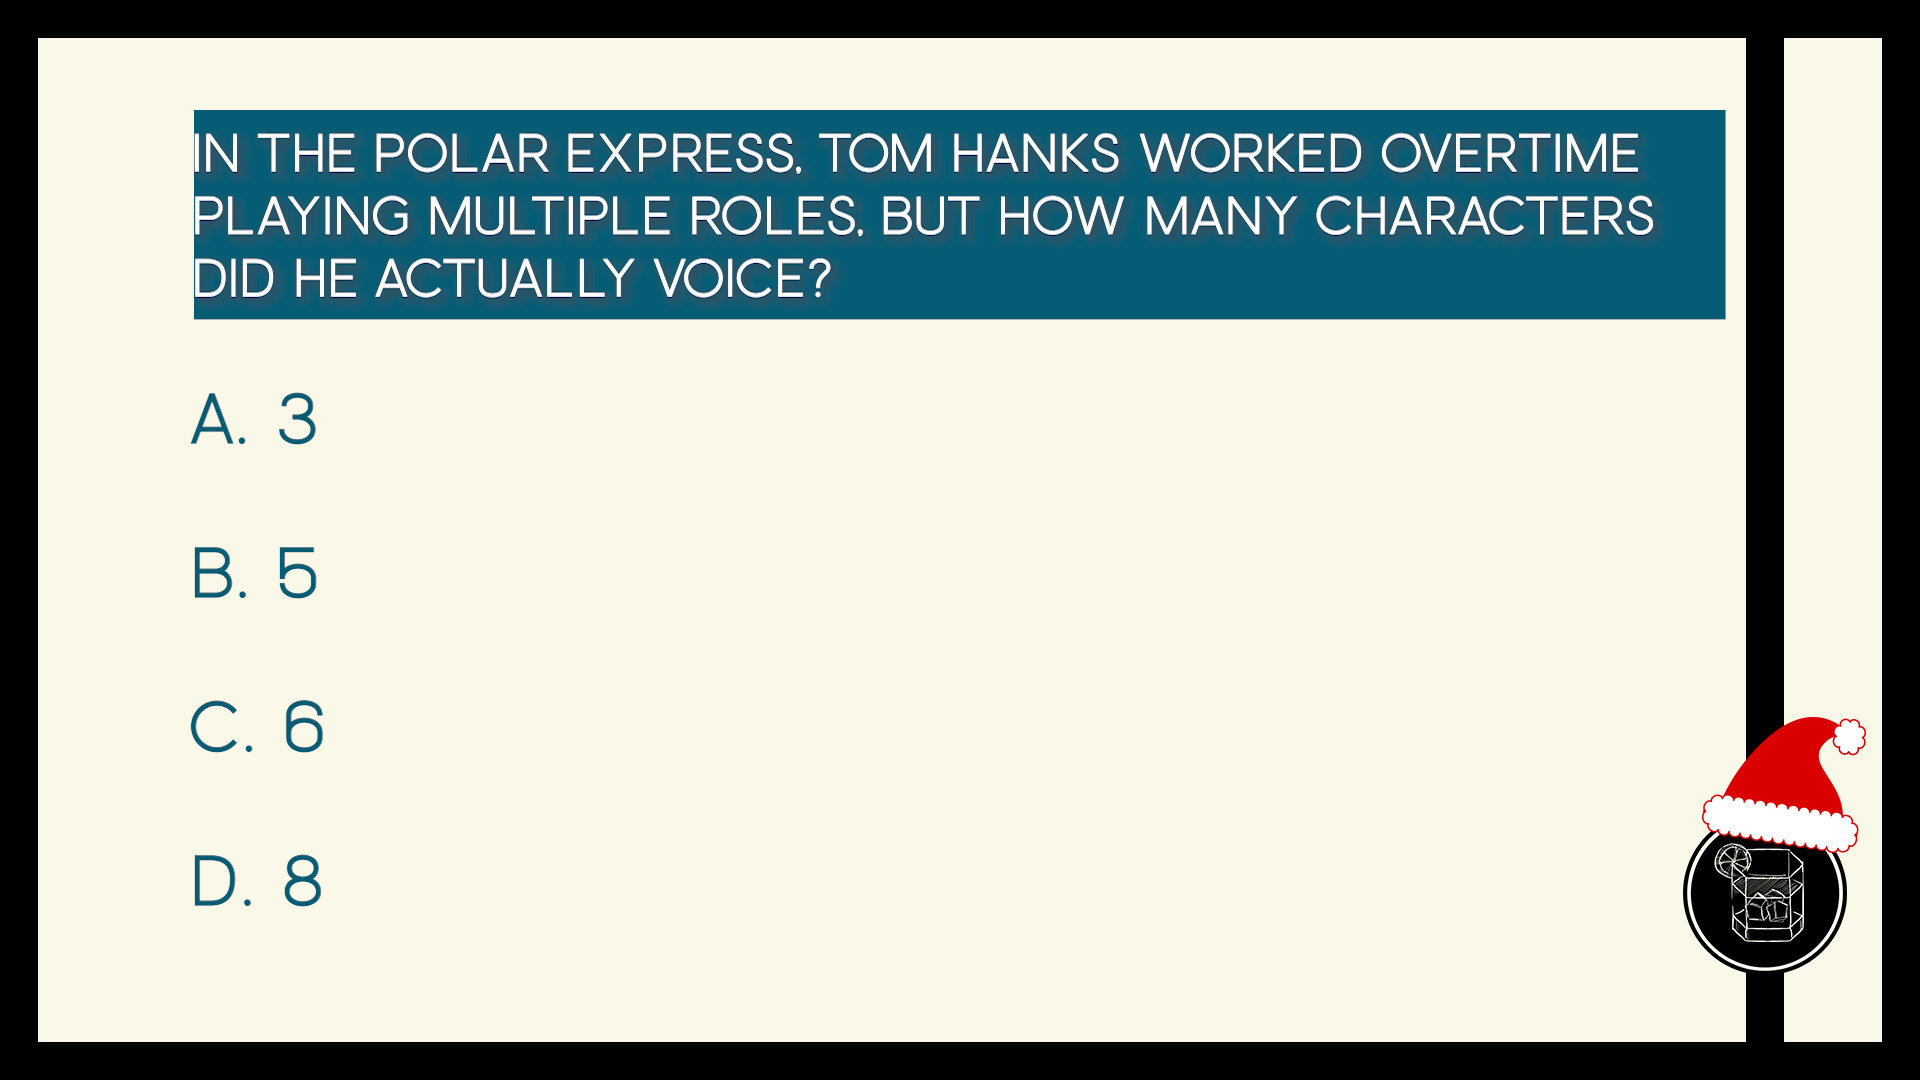 In The Polar Express, Tom Hanks worked overtime playing multiple roles, but how many characters did he actually voice?